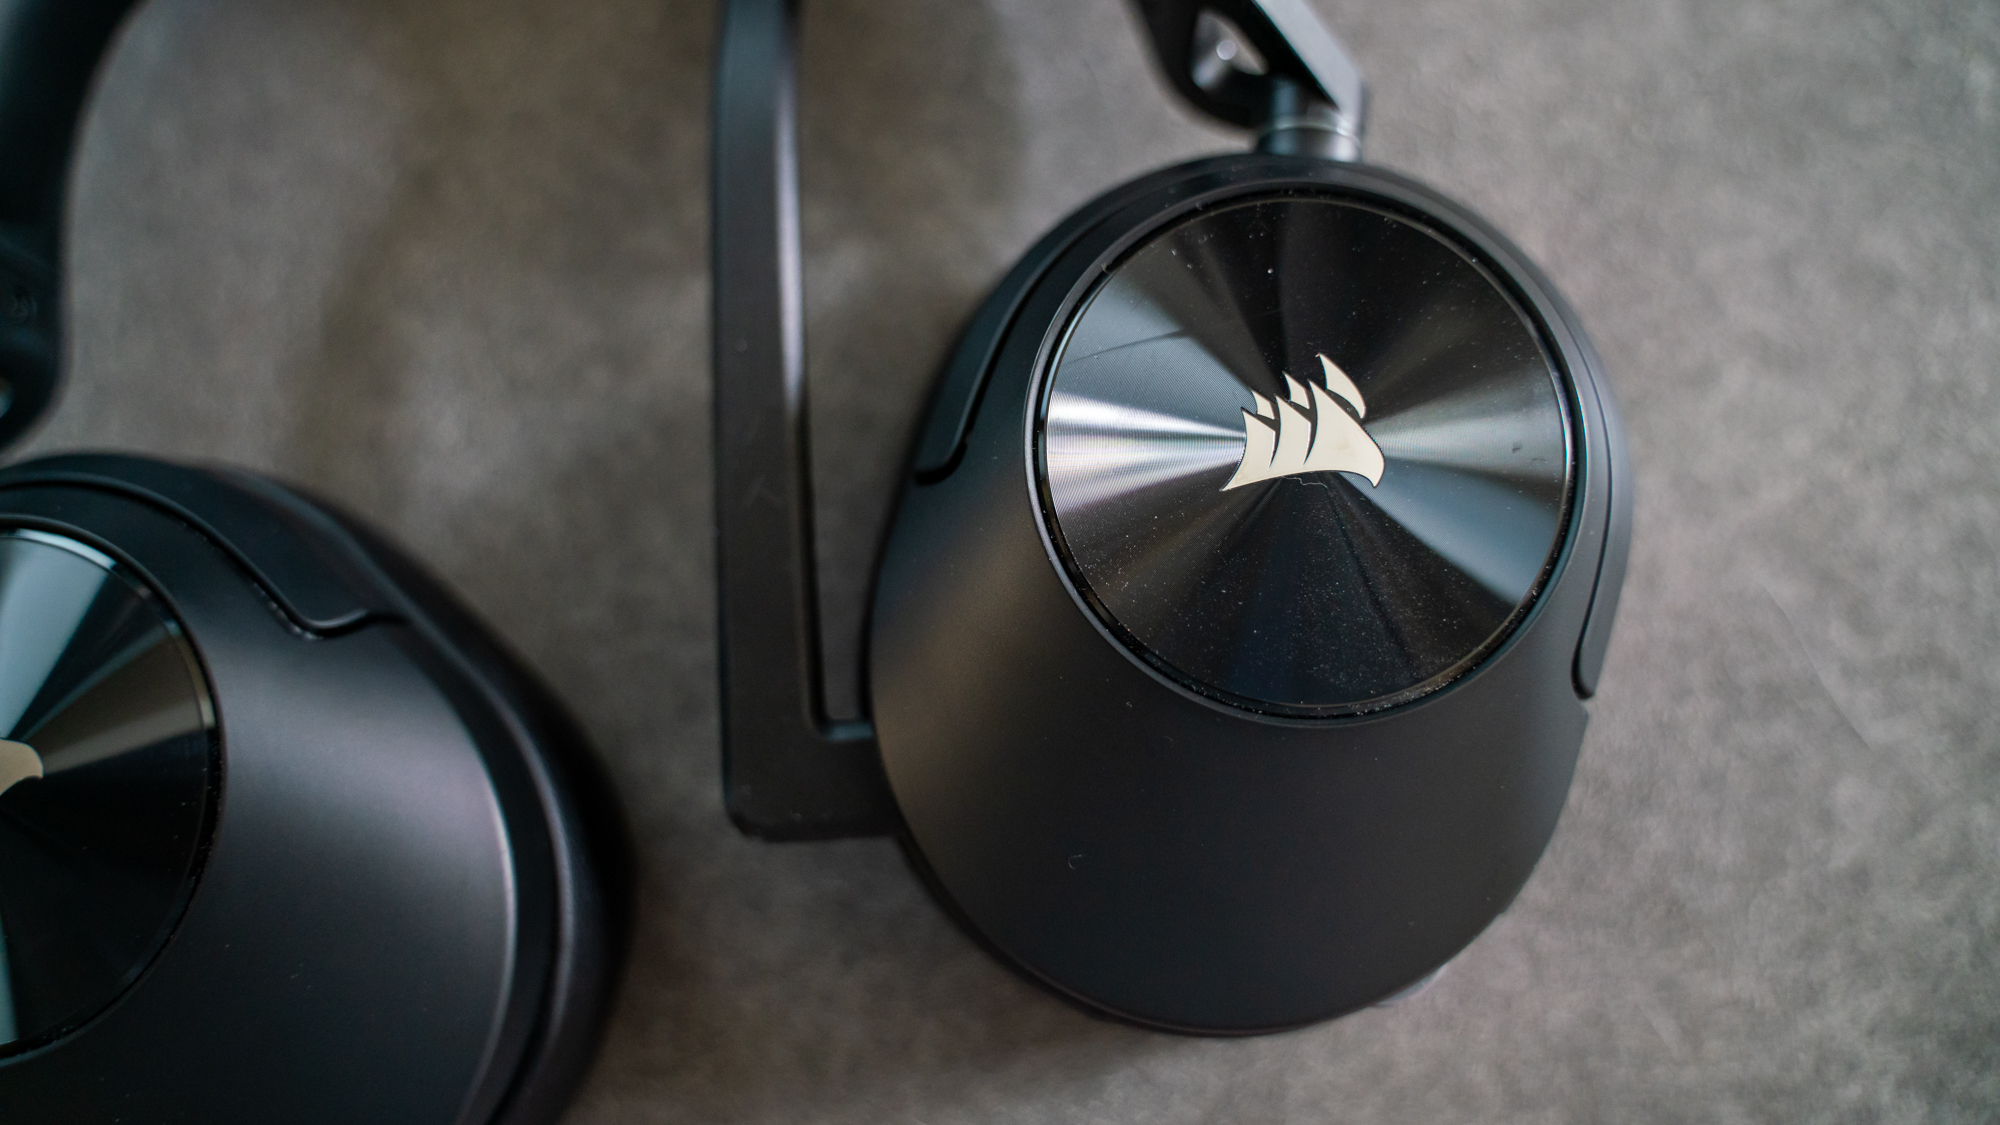 CORSAIR HS55 Stereo Headset Review